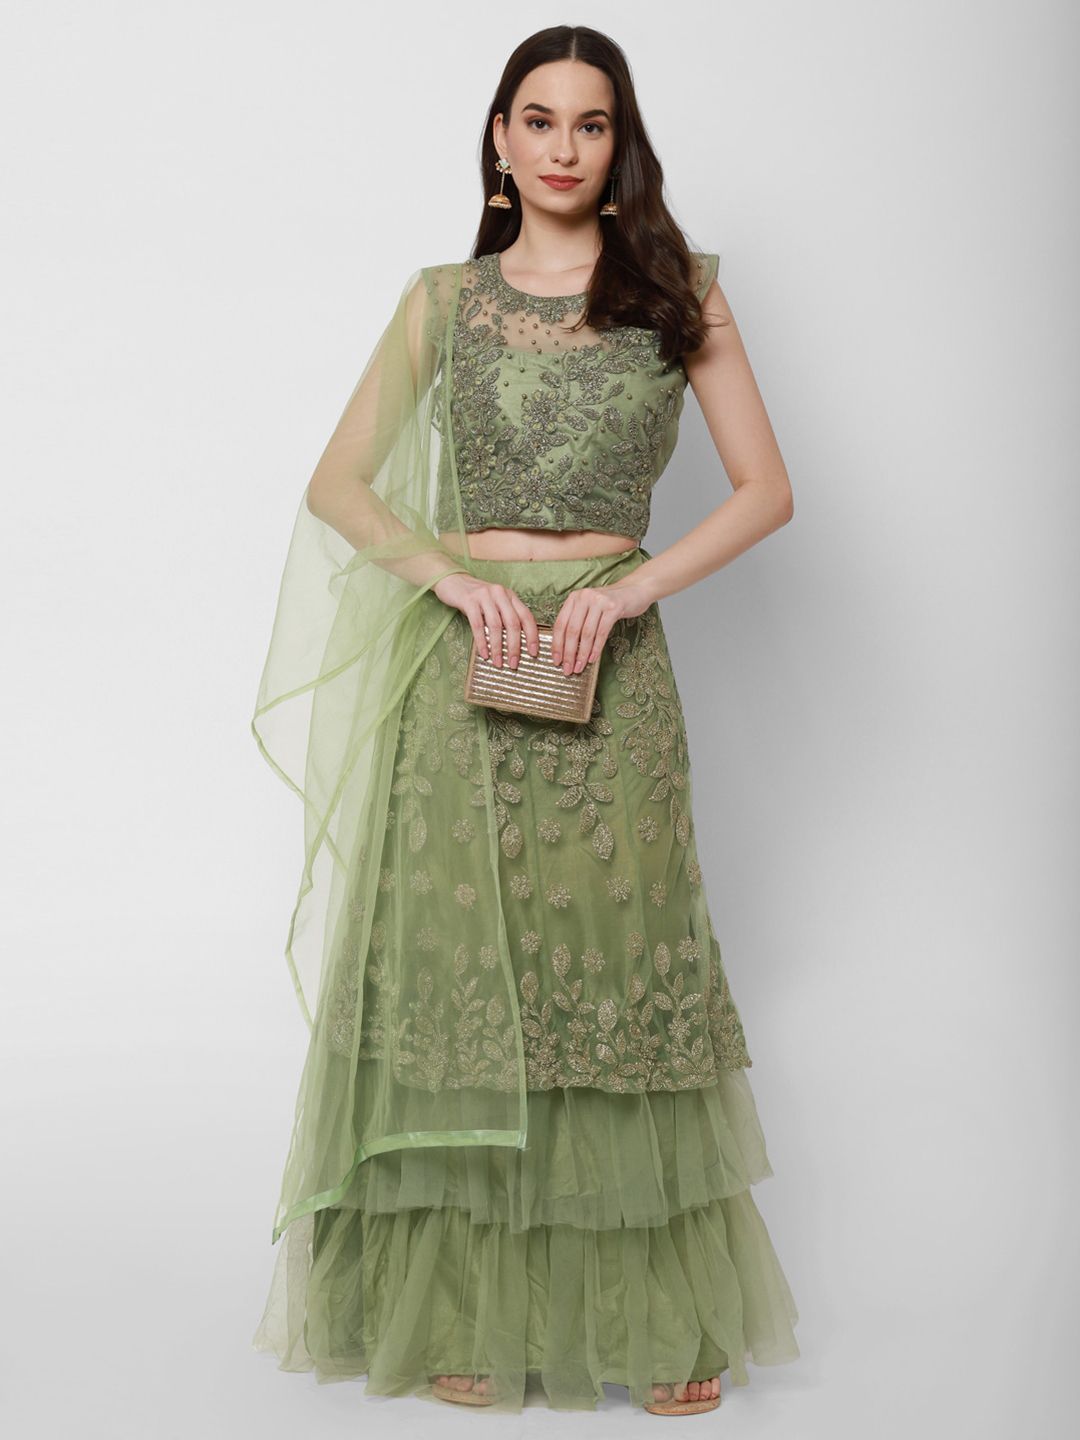 RedRound Green Embellished Semi-Stitched Lehenga & Unstitched Blouse With Dupatta Price in India